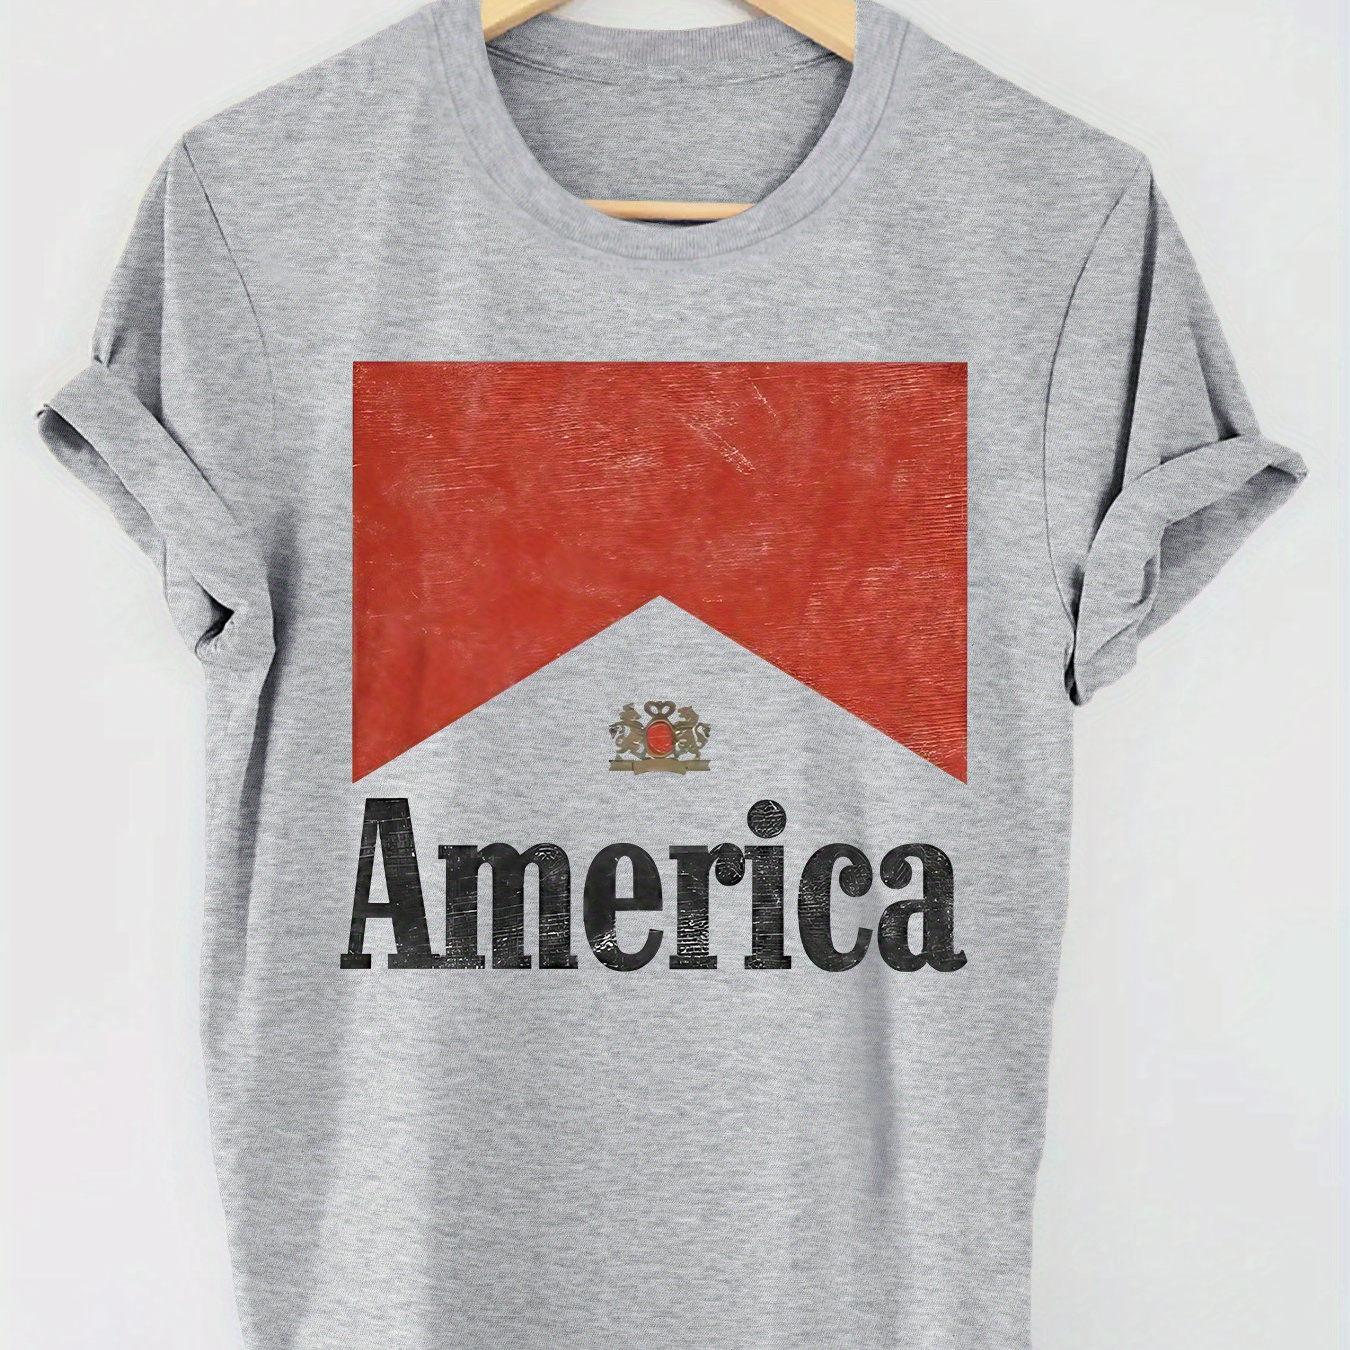 

America Letter & Graphic Print T-shirt, Short Sleeve Crew Neck Casual Top For Summer & Spring, Women's Clothing